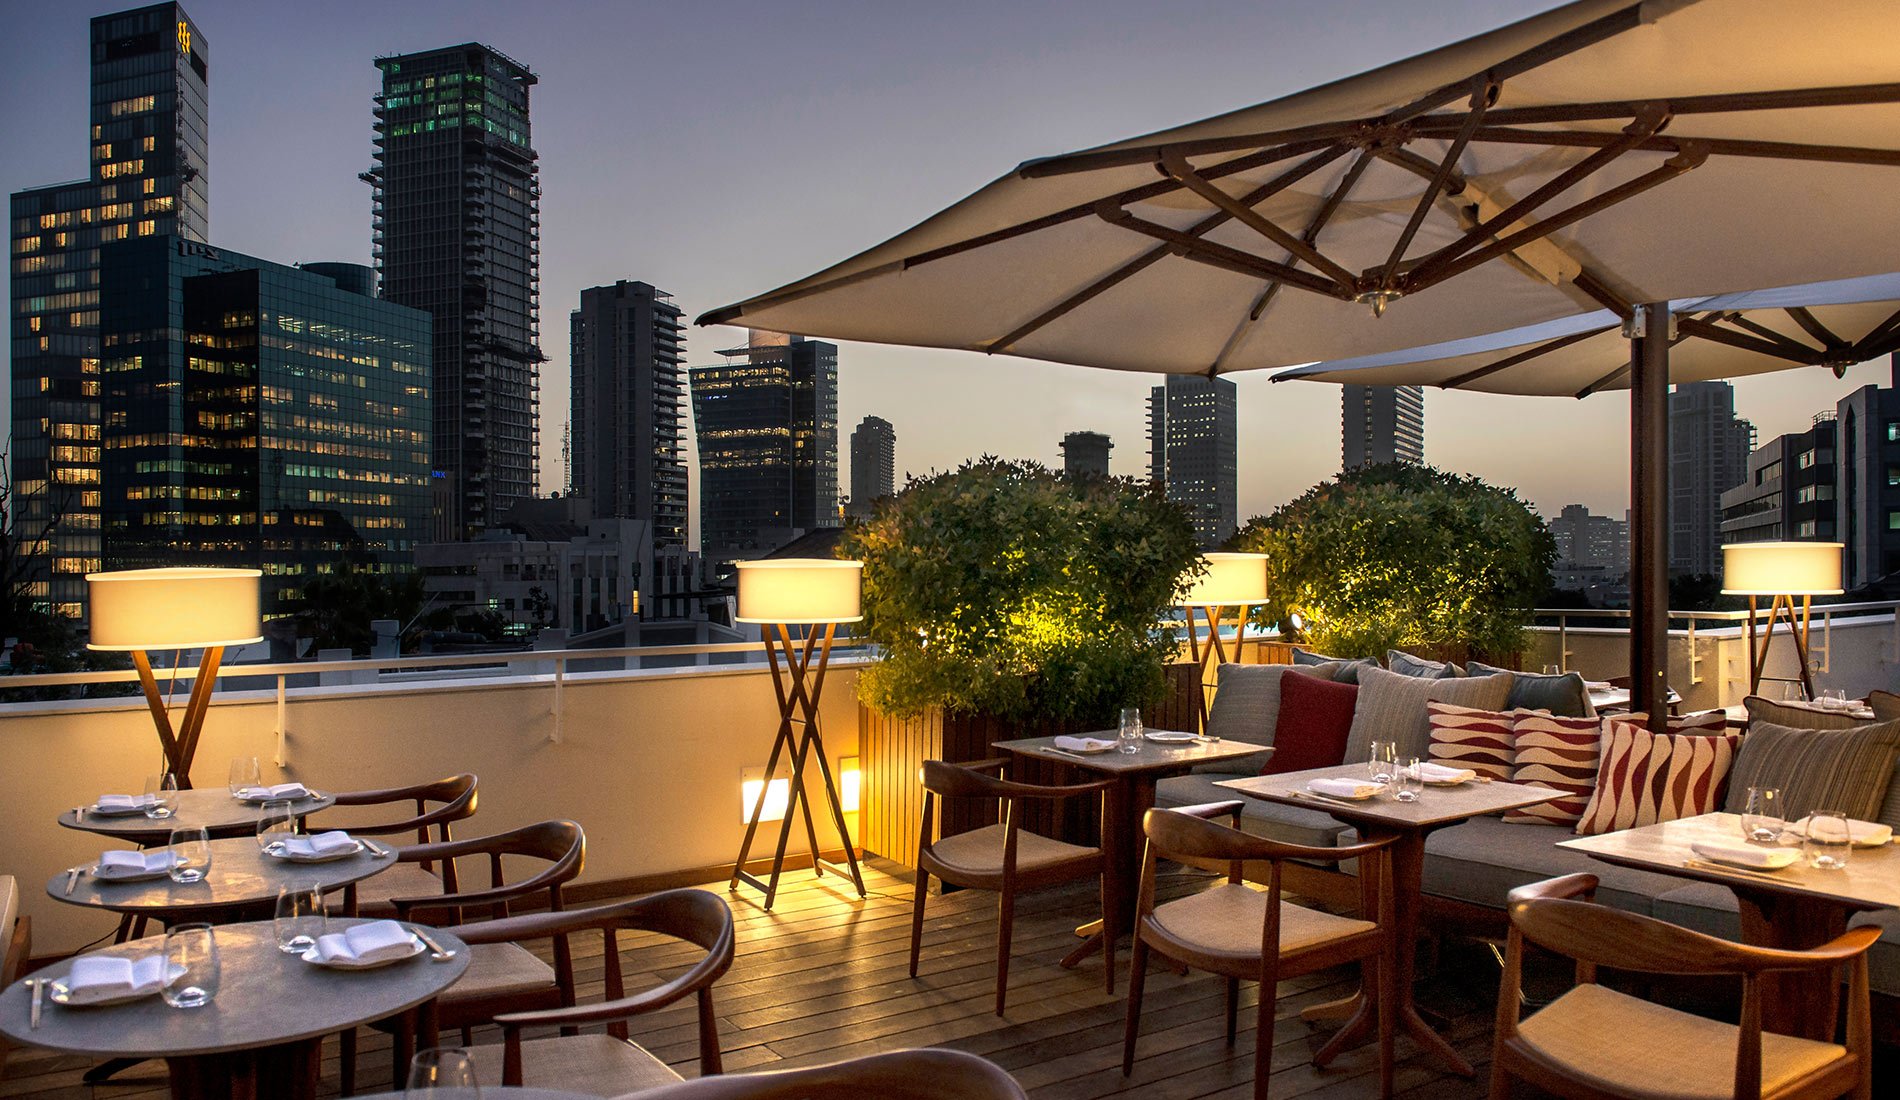 Luxury Hotel The Norman Tel Aviv Israel restaurant on the roof with a view